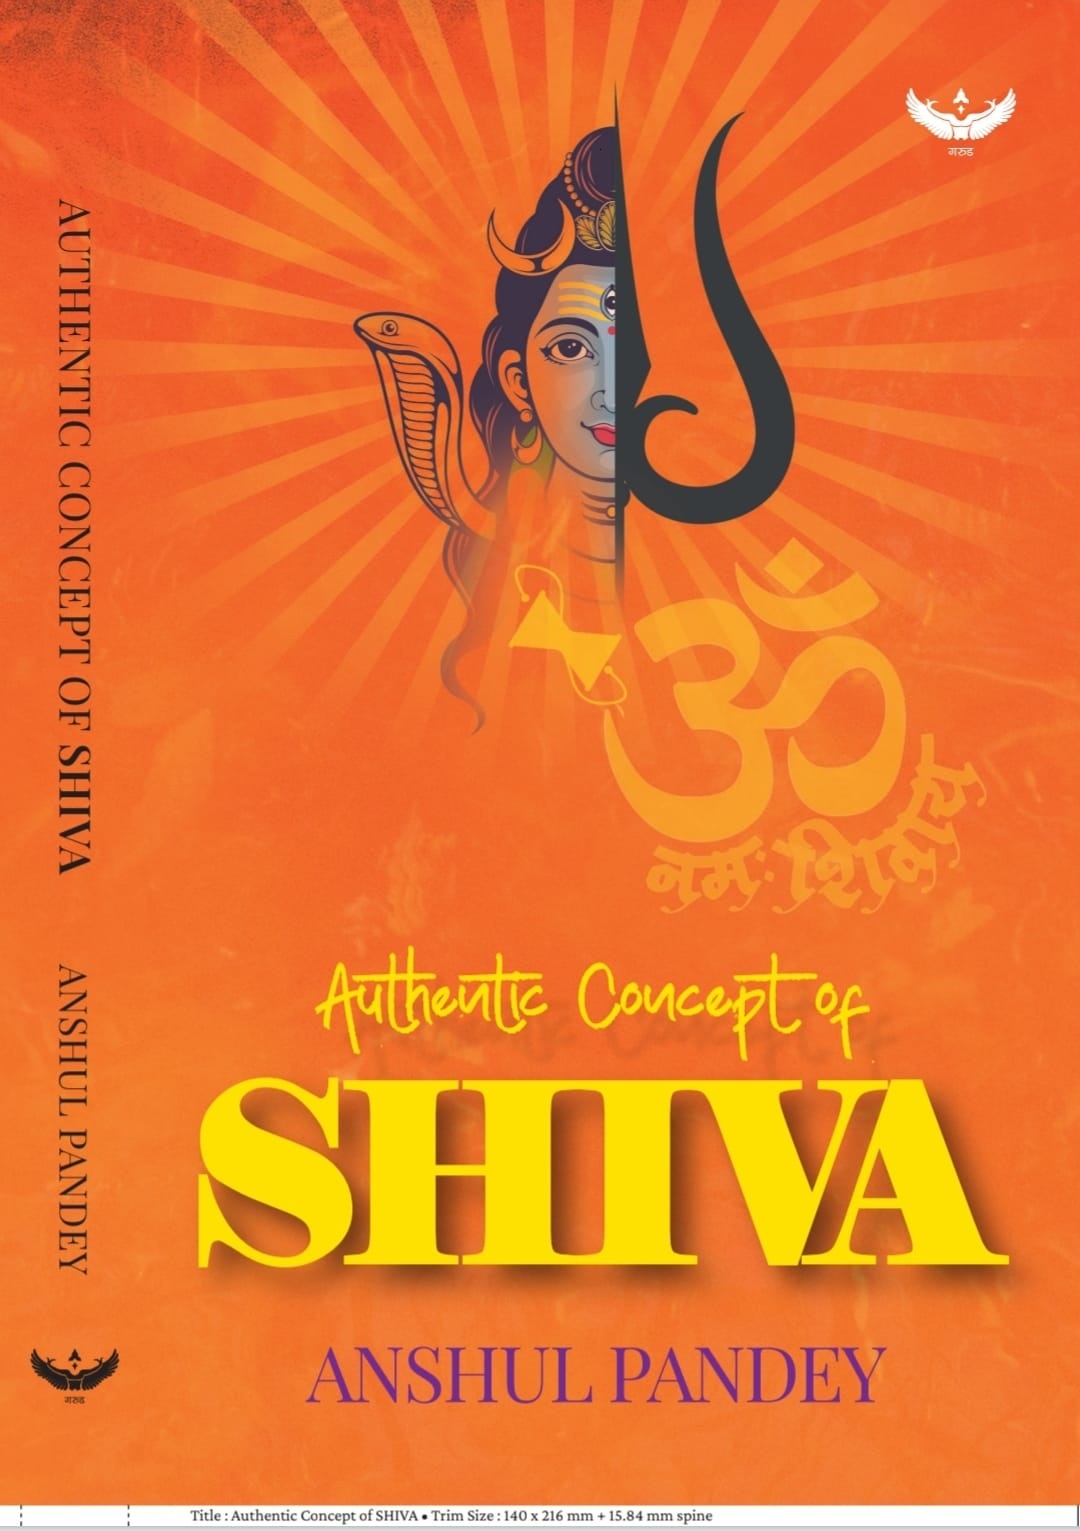 Authentic concepts of Shiva